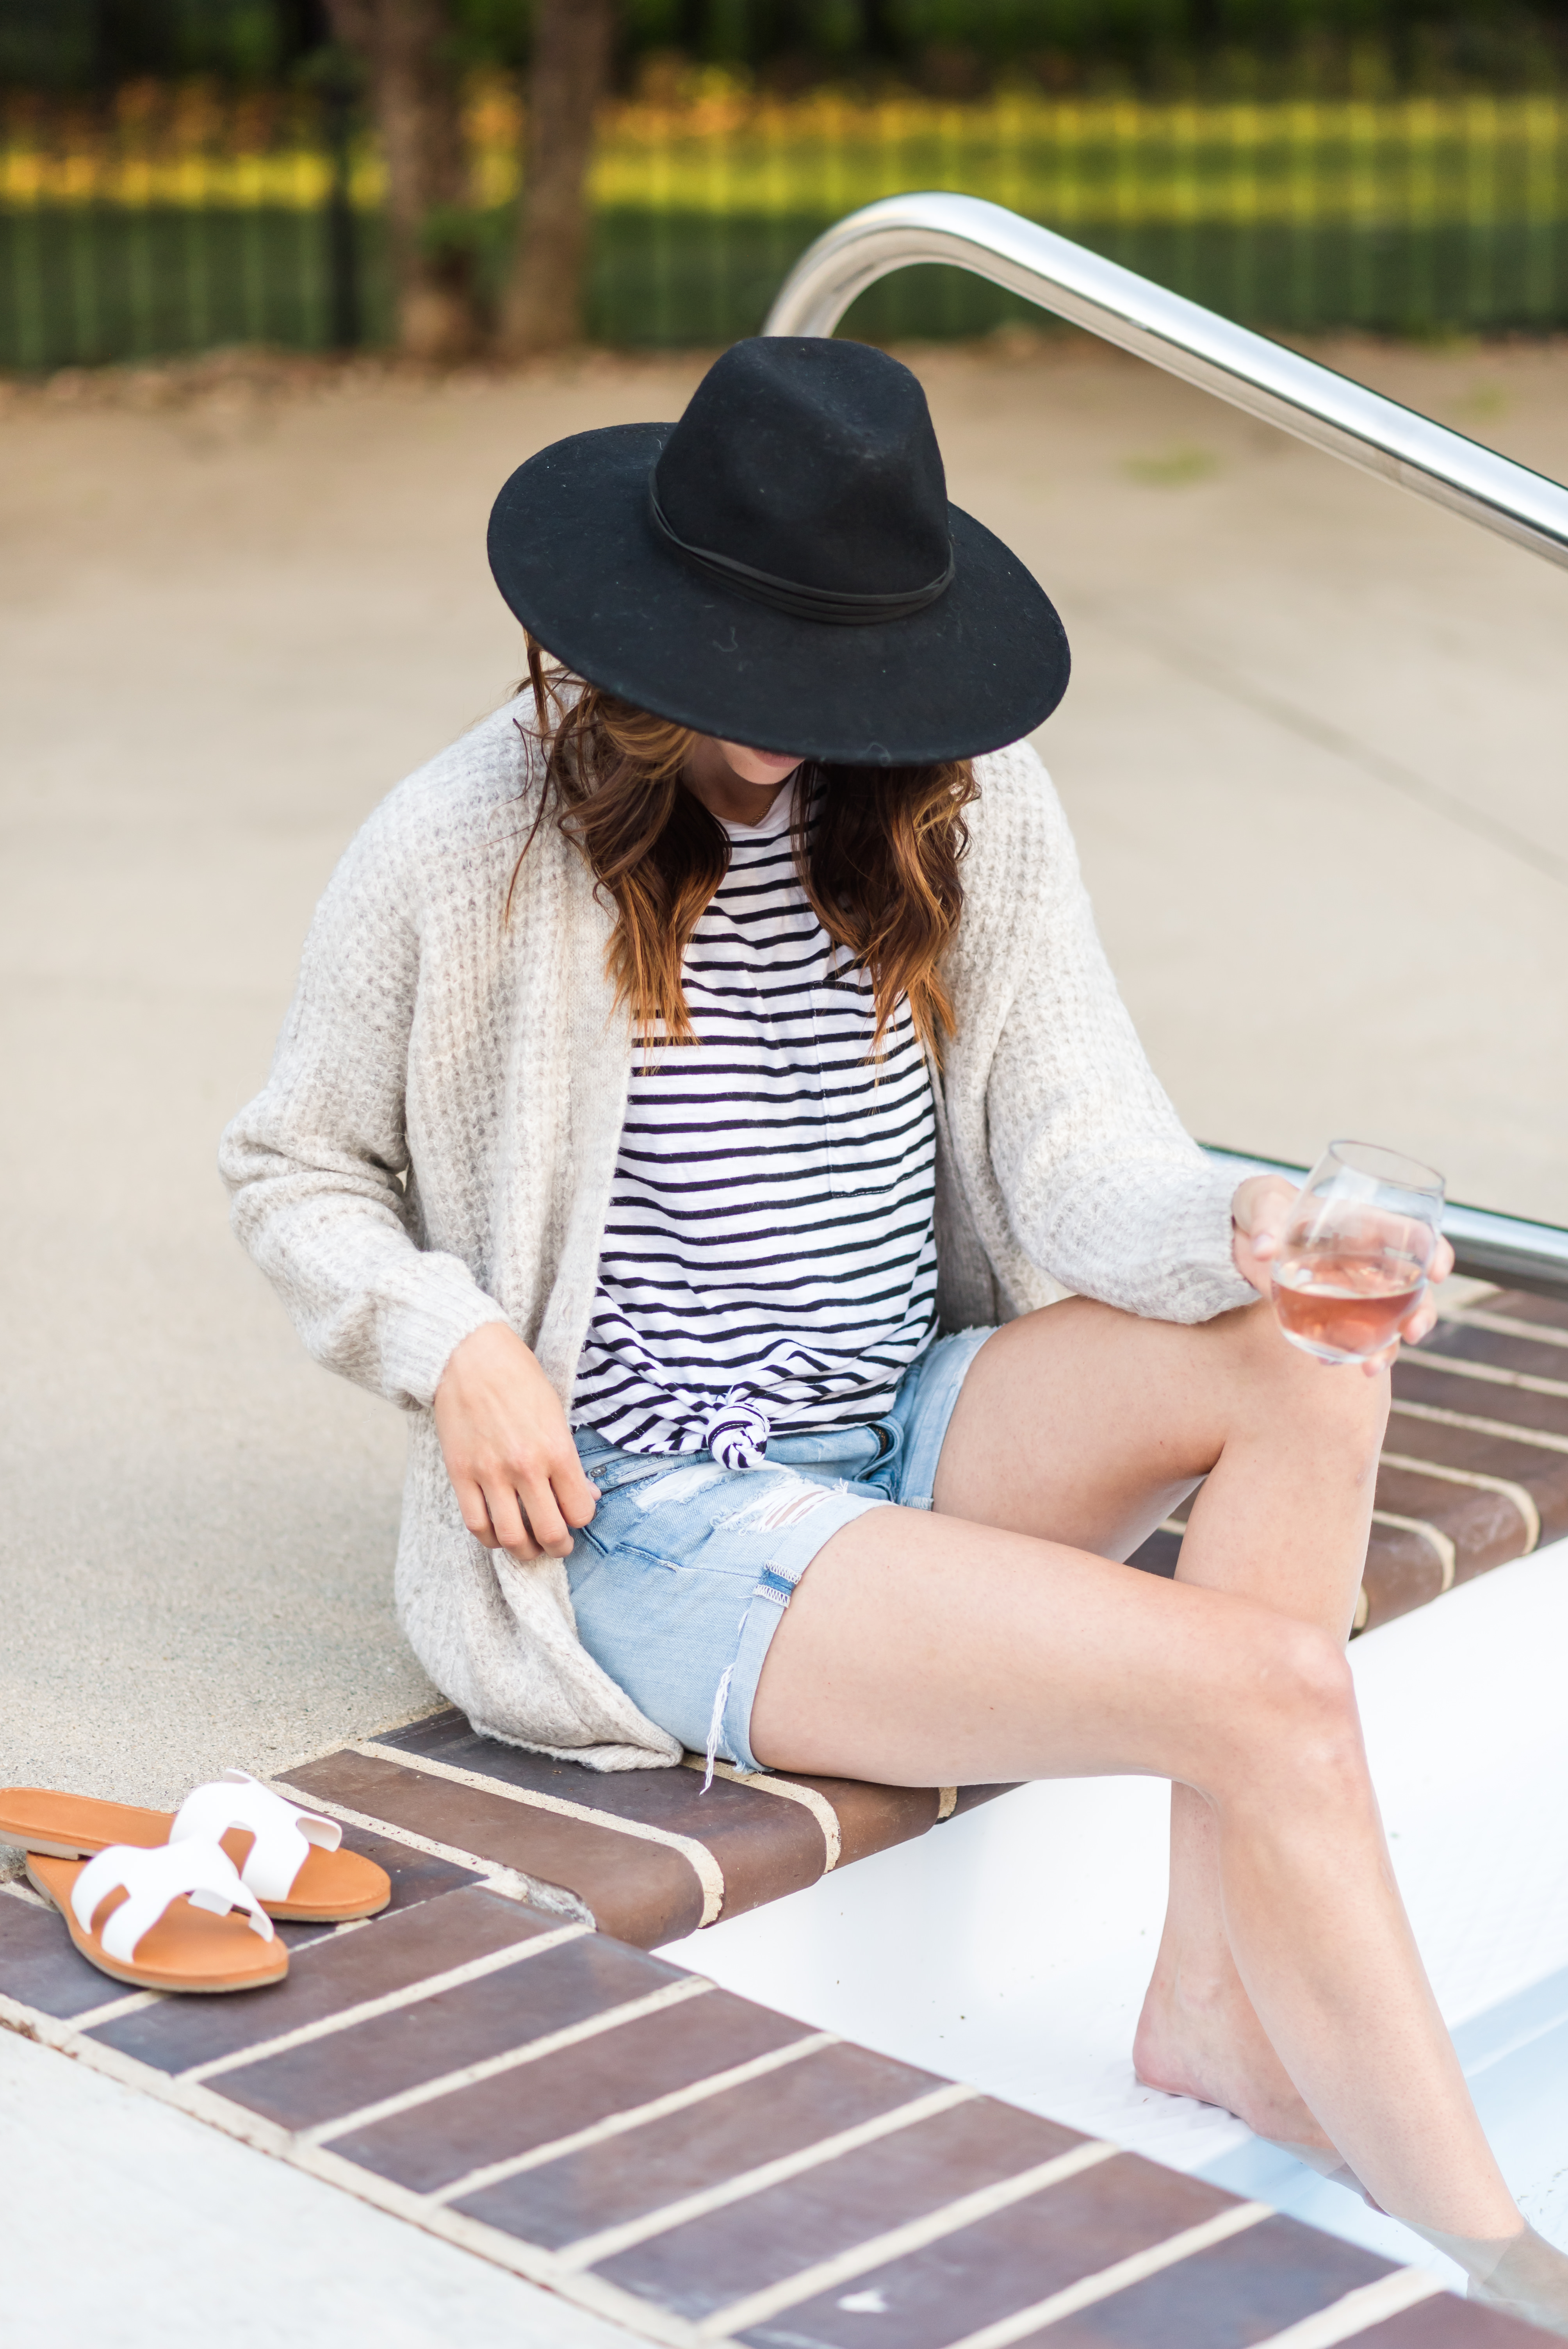 Summer cardigan - Midwest In Style